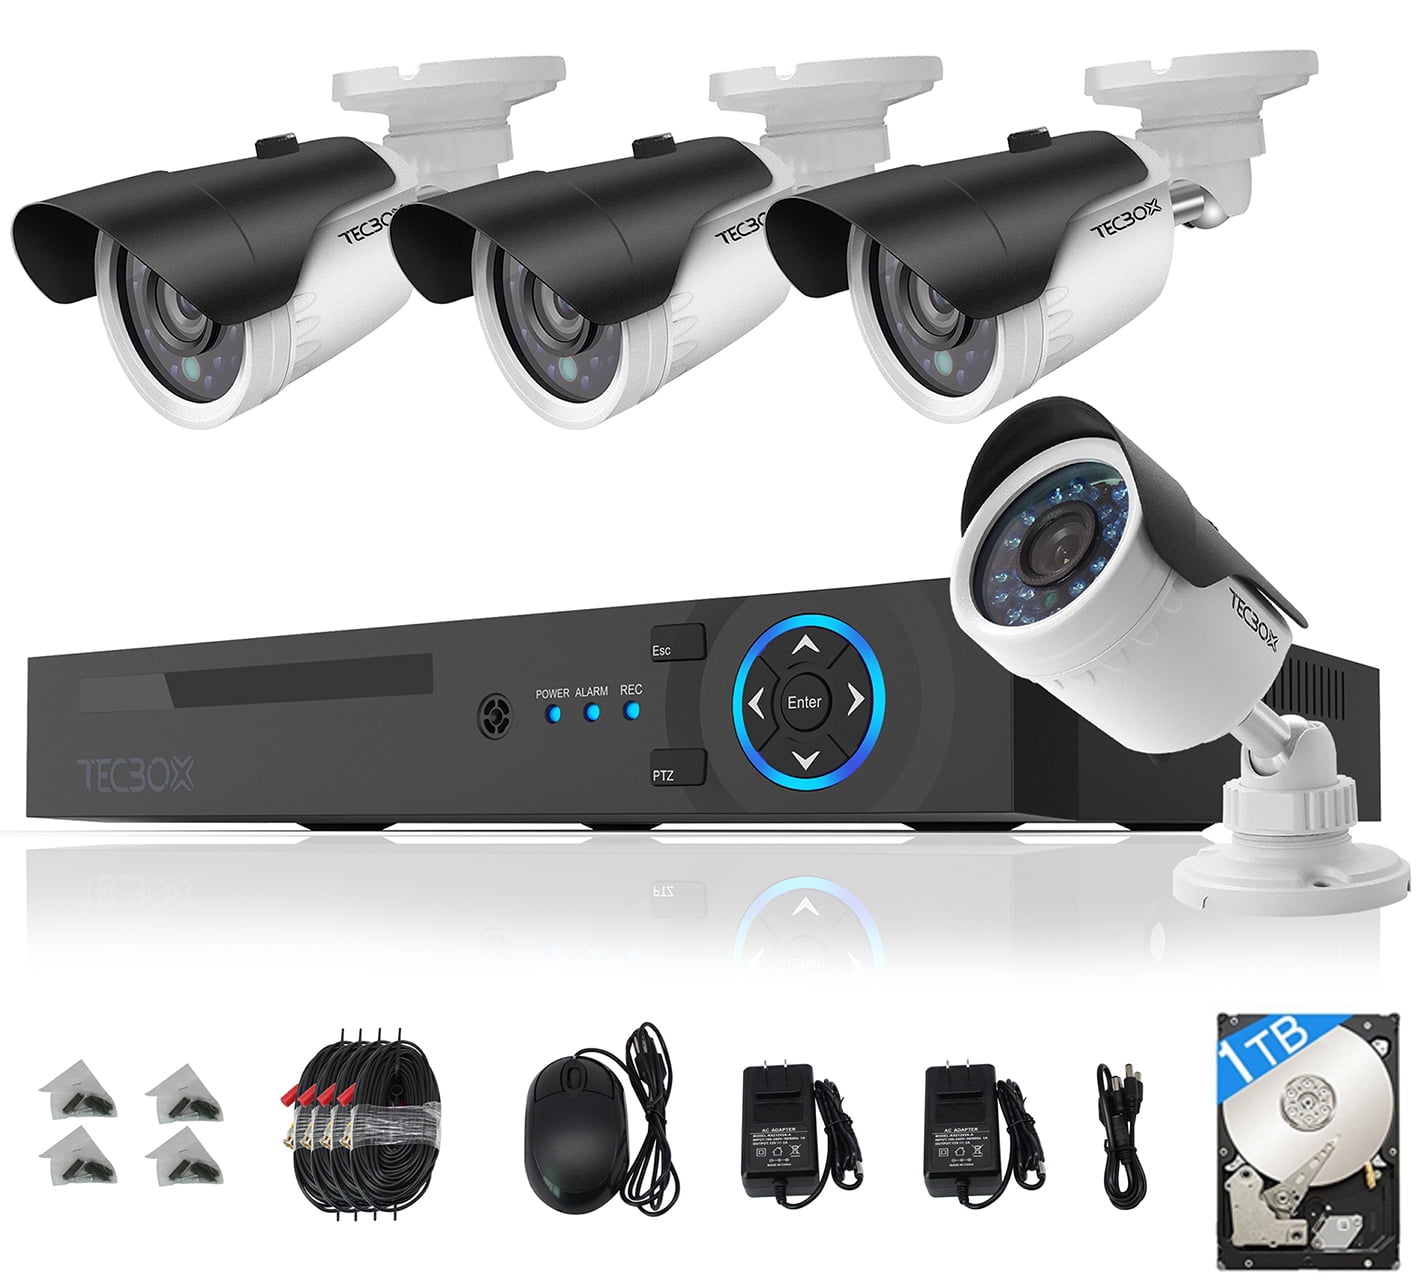 Tecbox Ahd Dvr 4 Channel Cctv Security Camera System With 4 Hd 720p